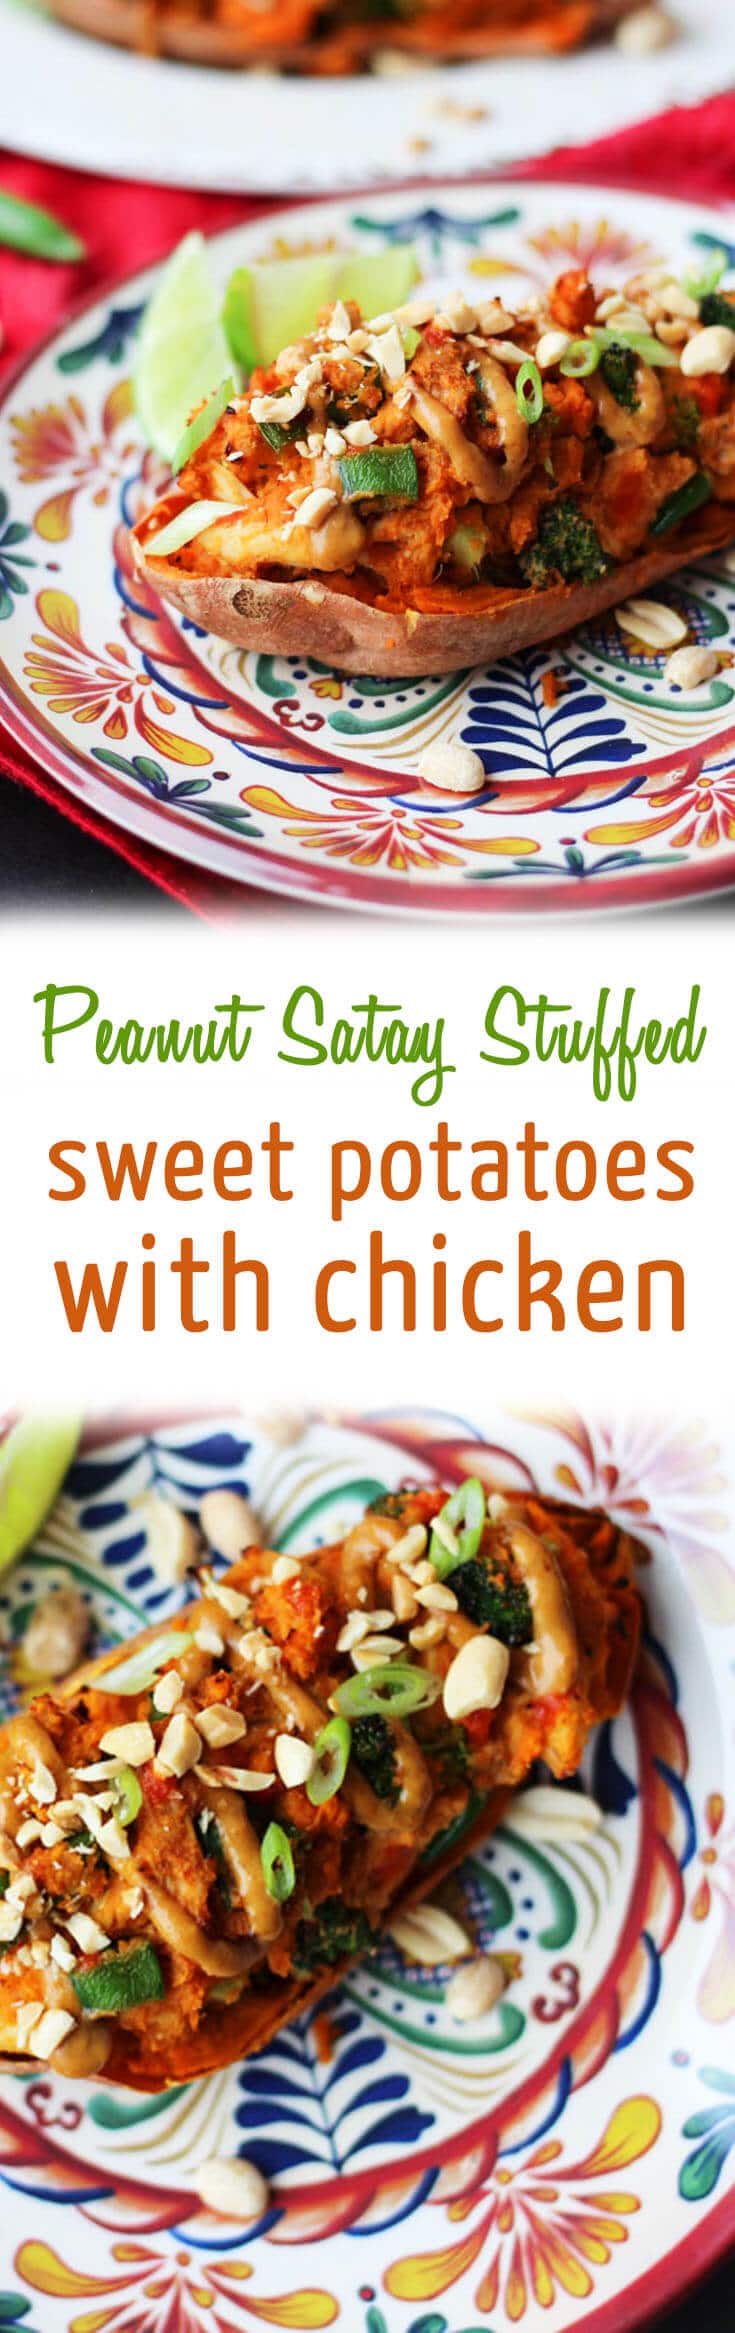 A pinterest photo of stuffed sweet potatoes with the text overlay \"Peanut Satay Stuffed sweet potatoes with chicken.\"